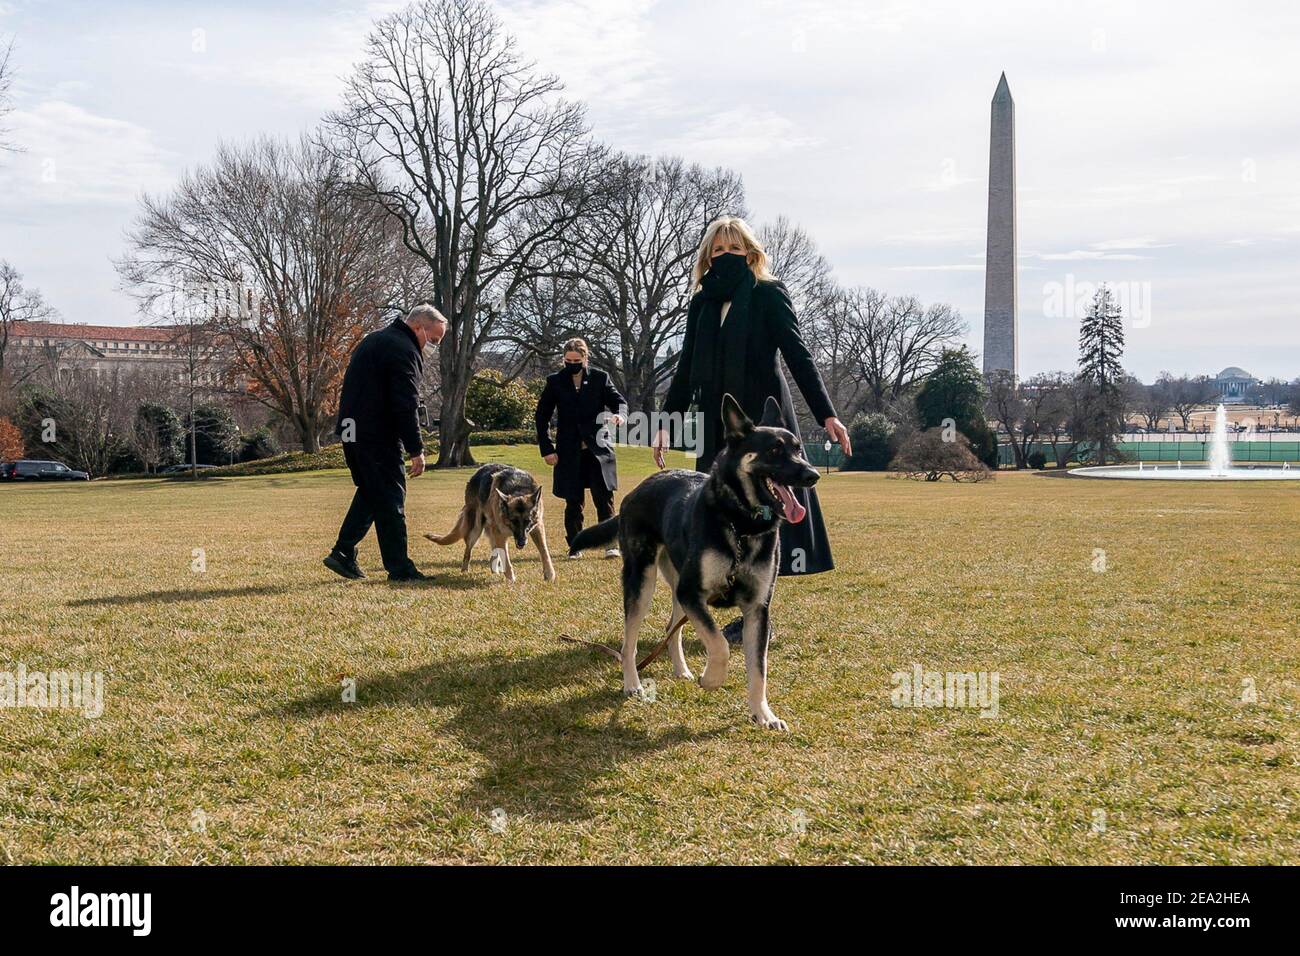 U.S First Lady Dr Jill Biden, joined by White House Grounds Superintendent Dale Haney and her granddaughter Maisy Biden, play with their dogs Major and Champ on the South Lawn of the White House January 24, 2021 in Washington, DC. Stock Photo